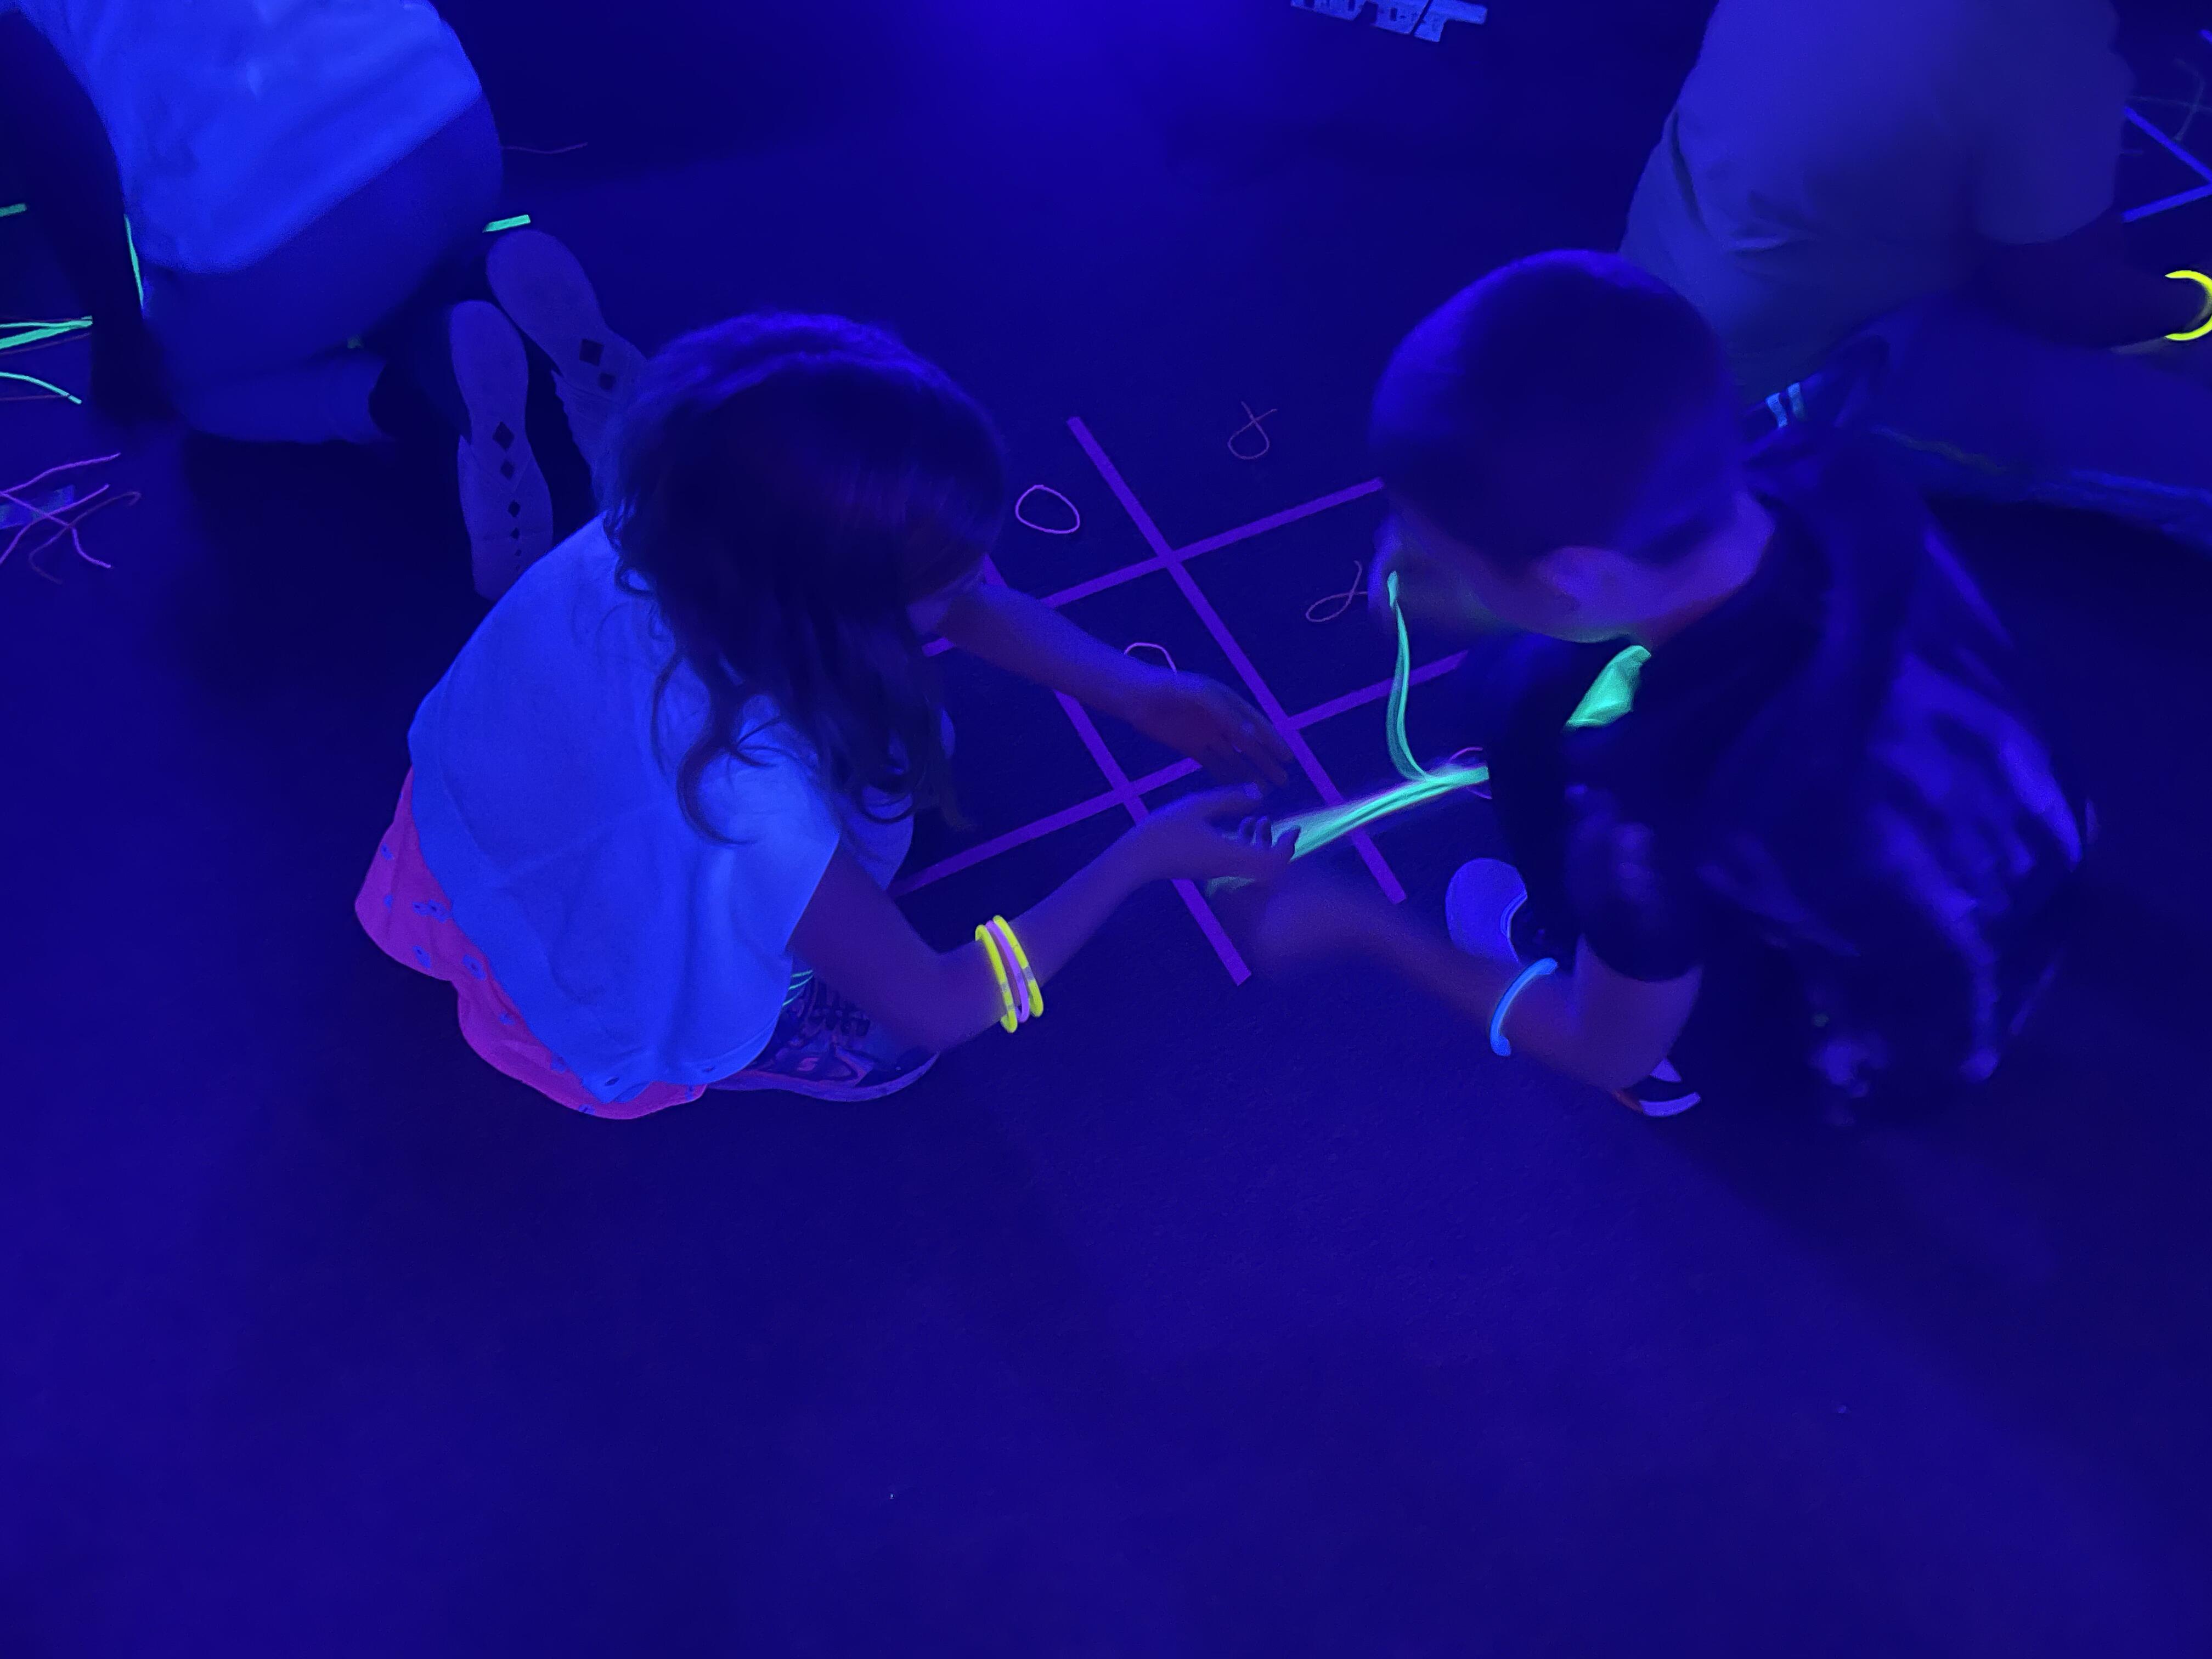 Park students use the glow room photo 2